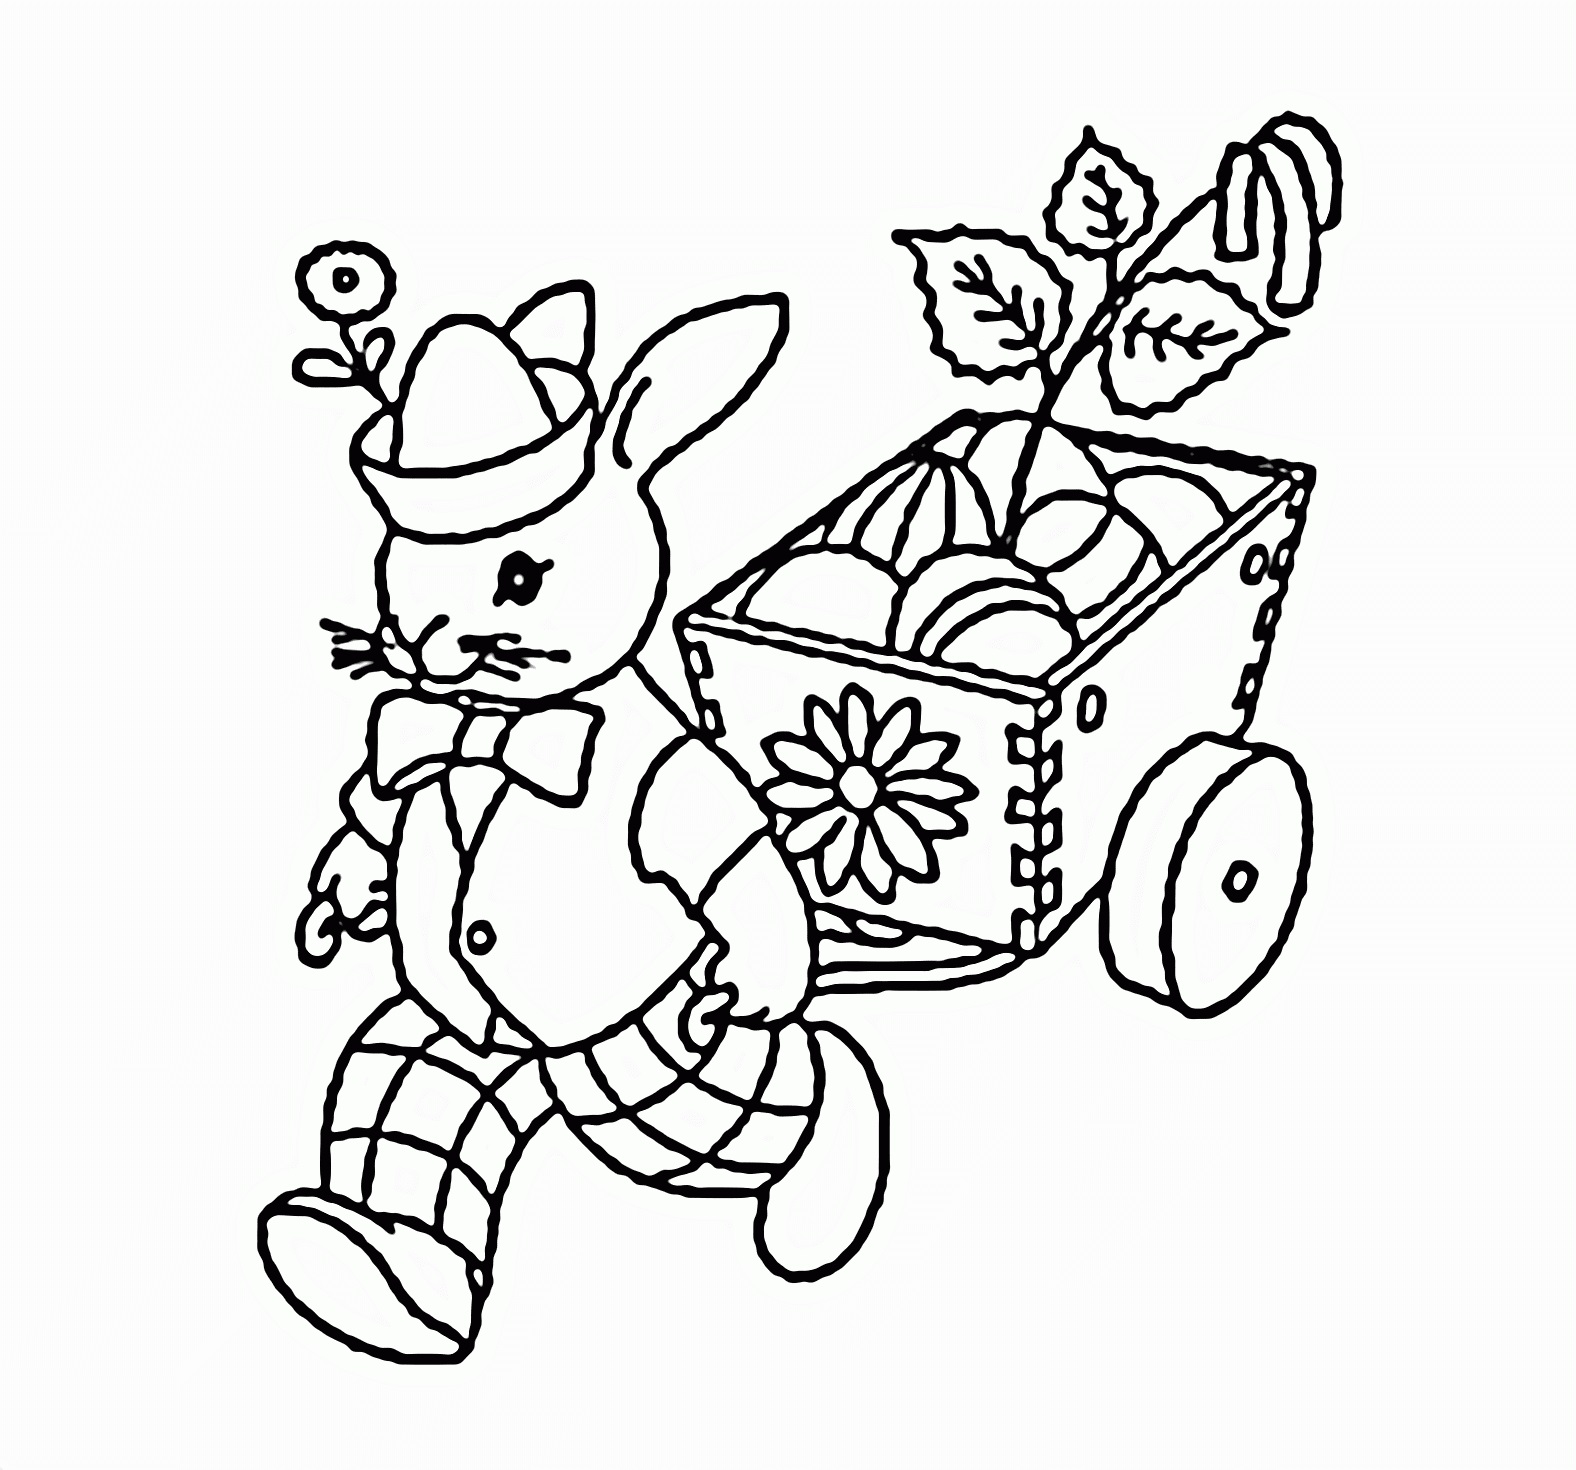 Among Us Easter Coloring Pages - 299+ SVG File for DIY Machine